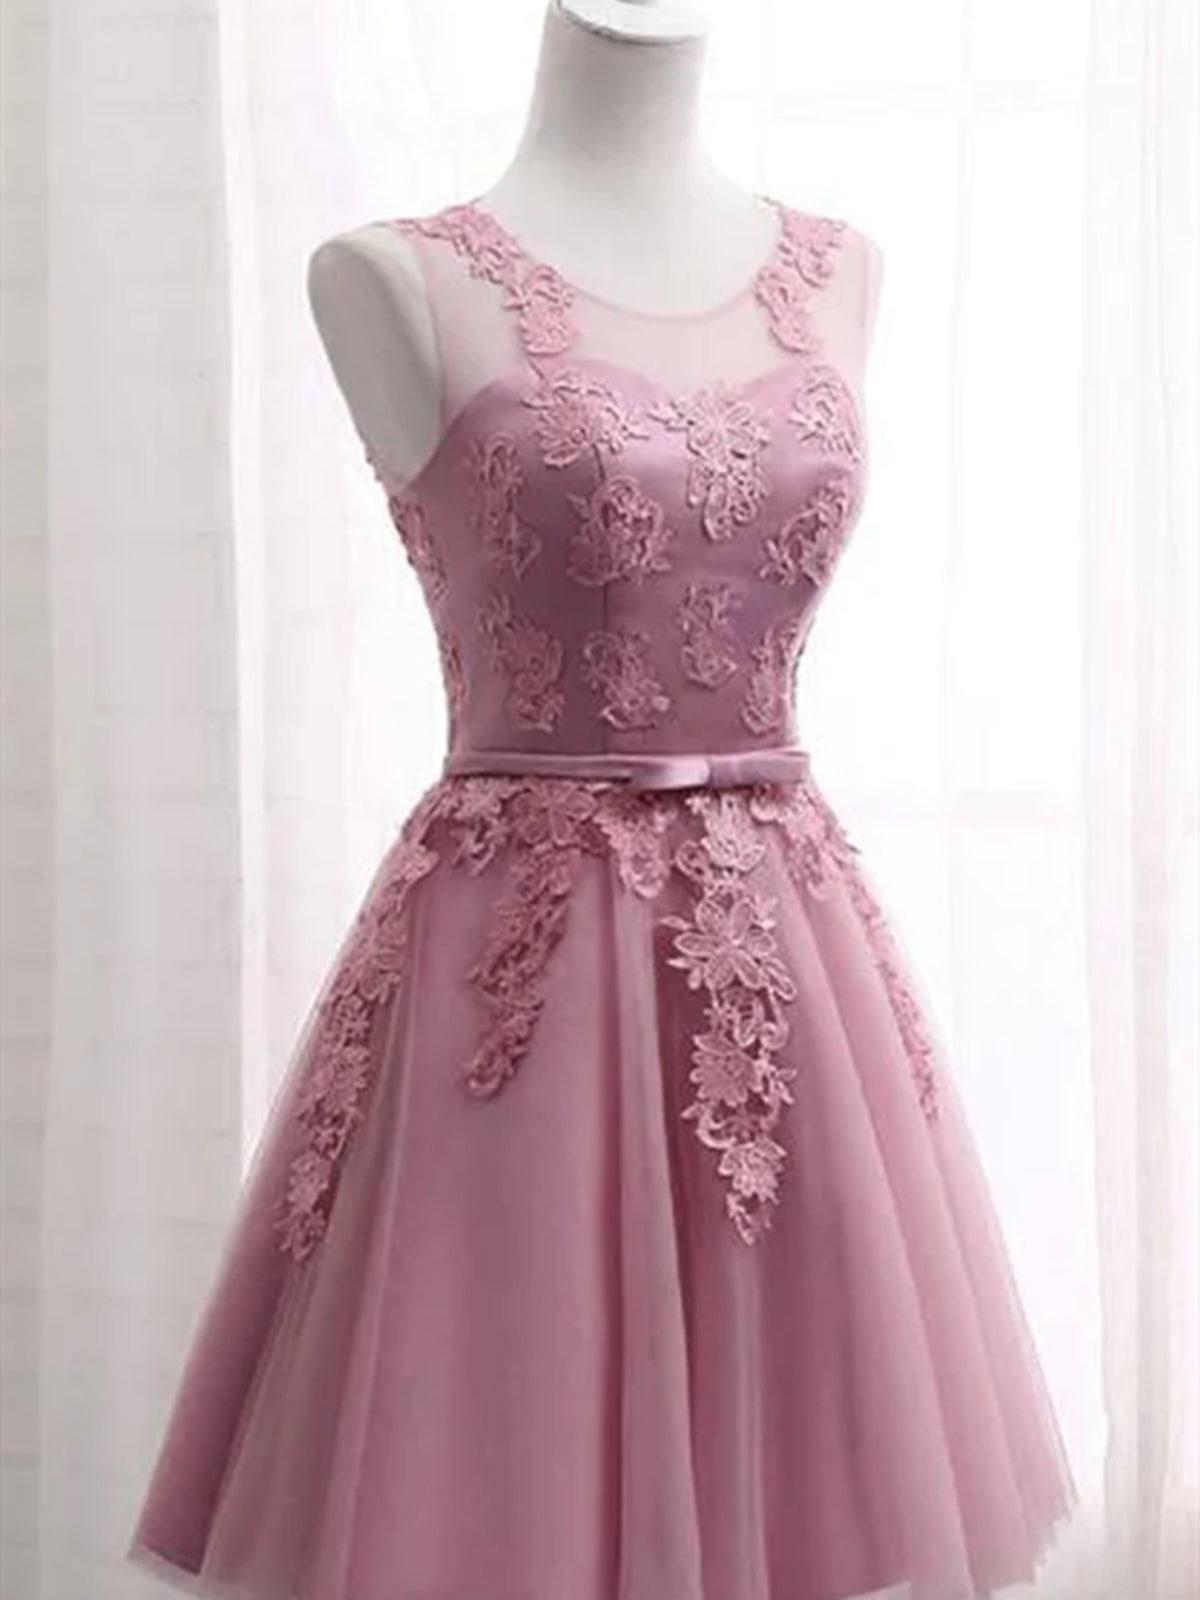 Go Out Outfit, Short Pink Lace Prom Dresses, Short Pink Lace Graduation Homecoming Dresses